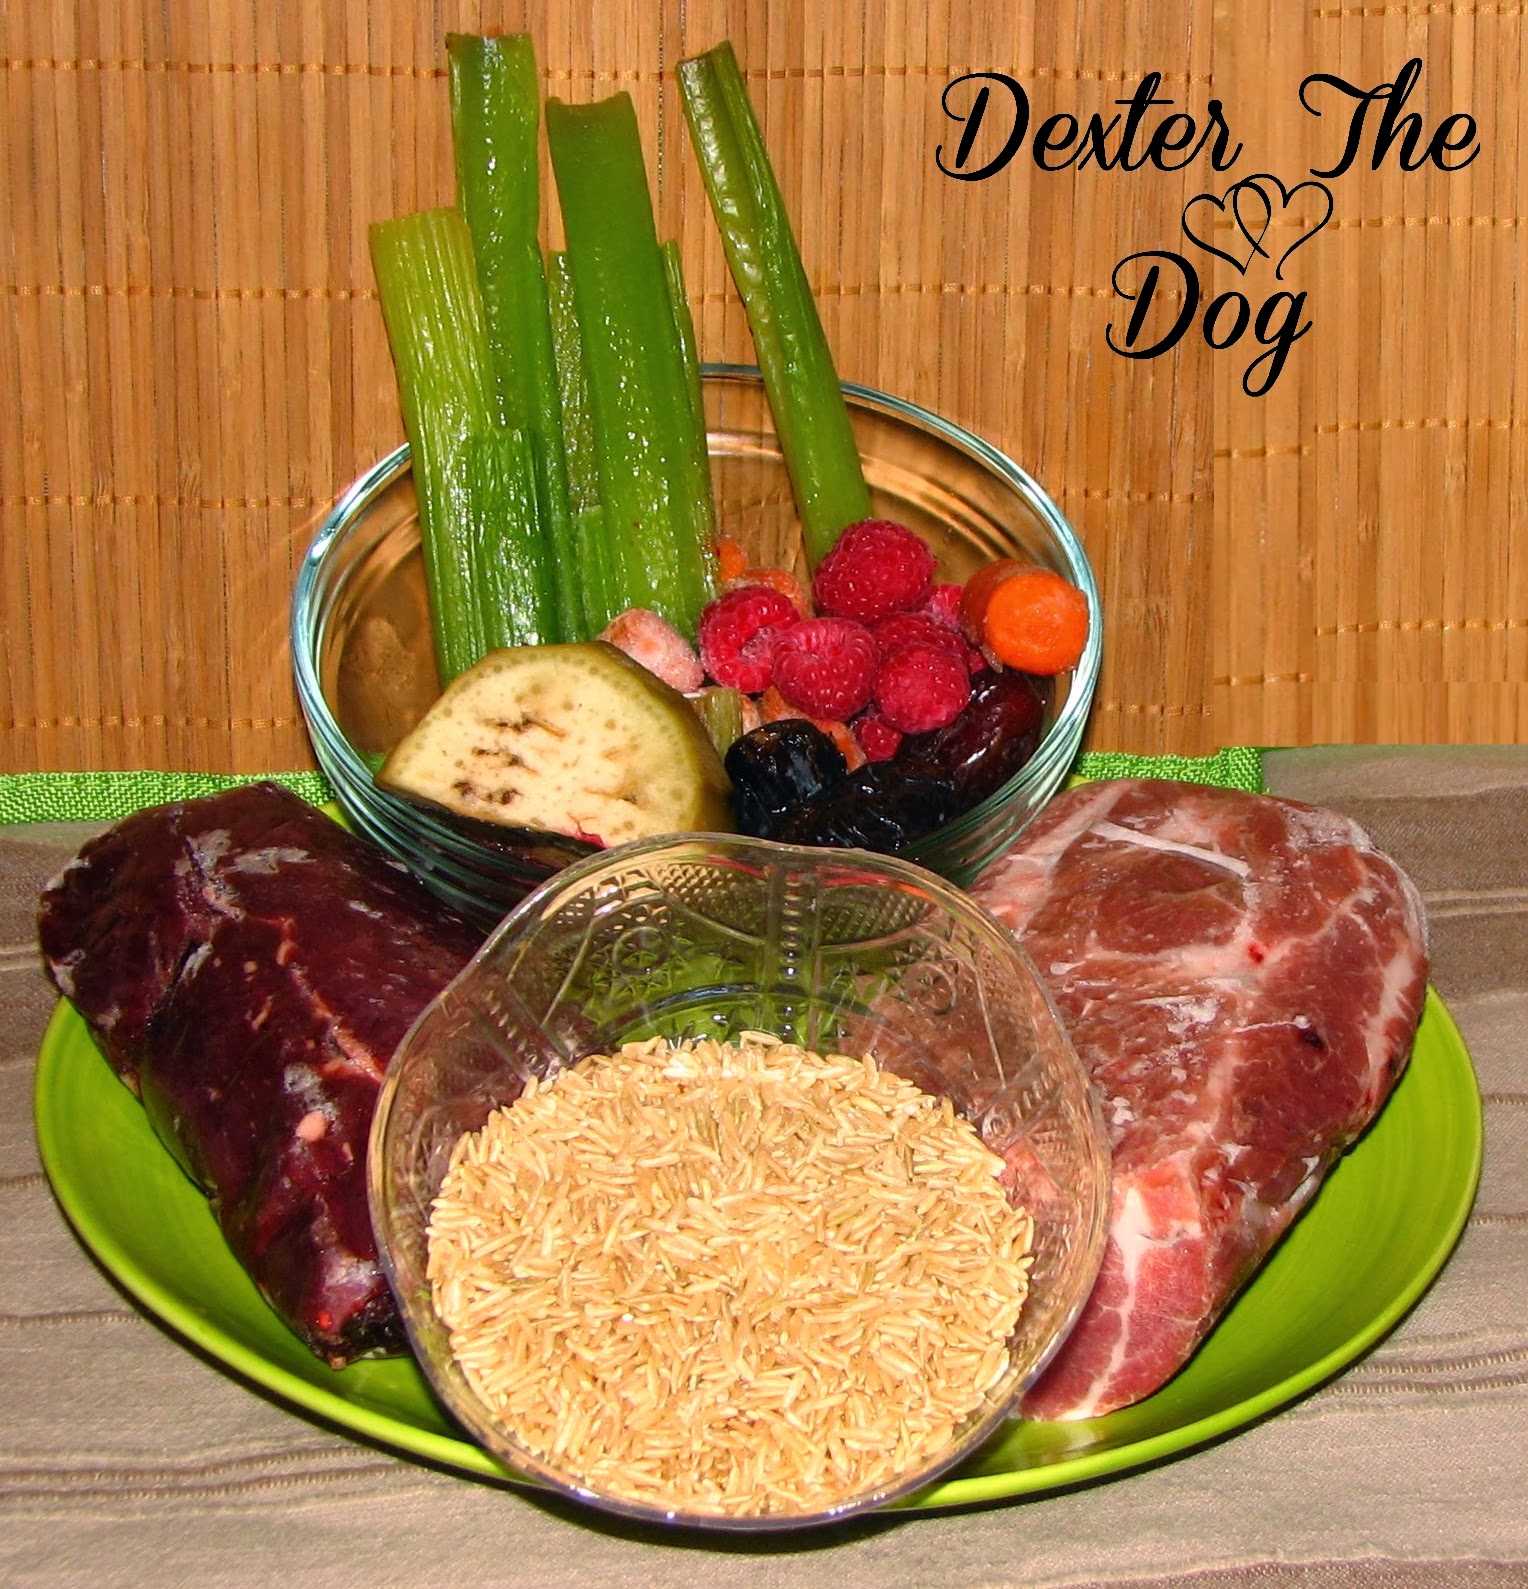 Healthy Home Cooked Dog Food Recipes Pork, Veggies and